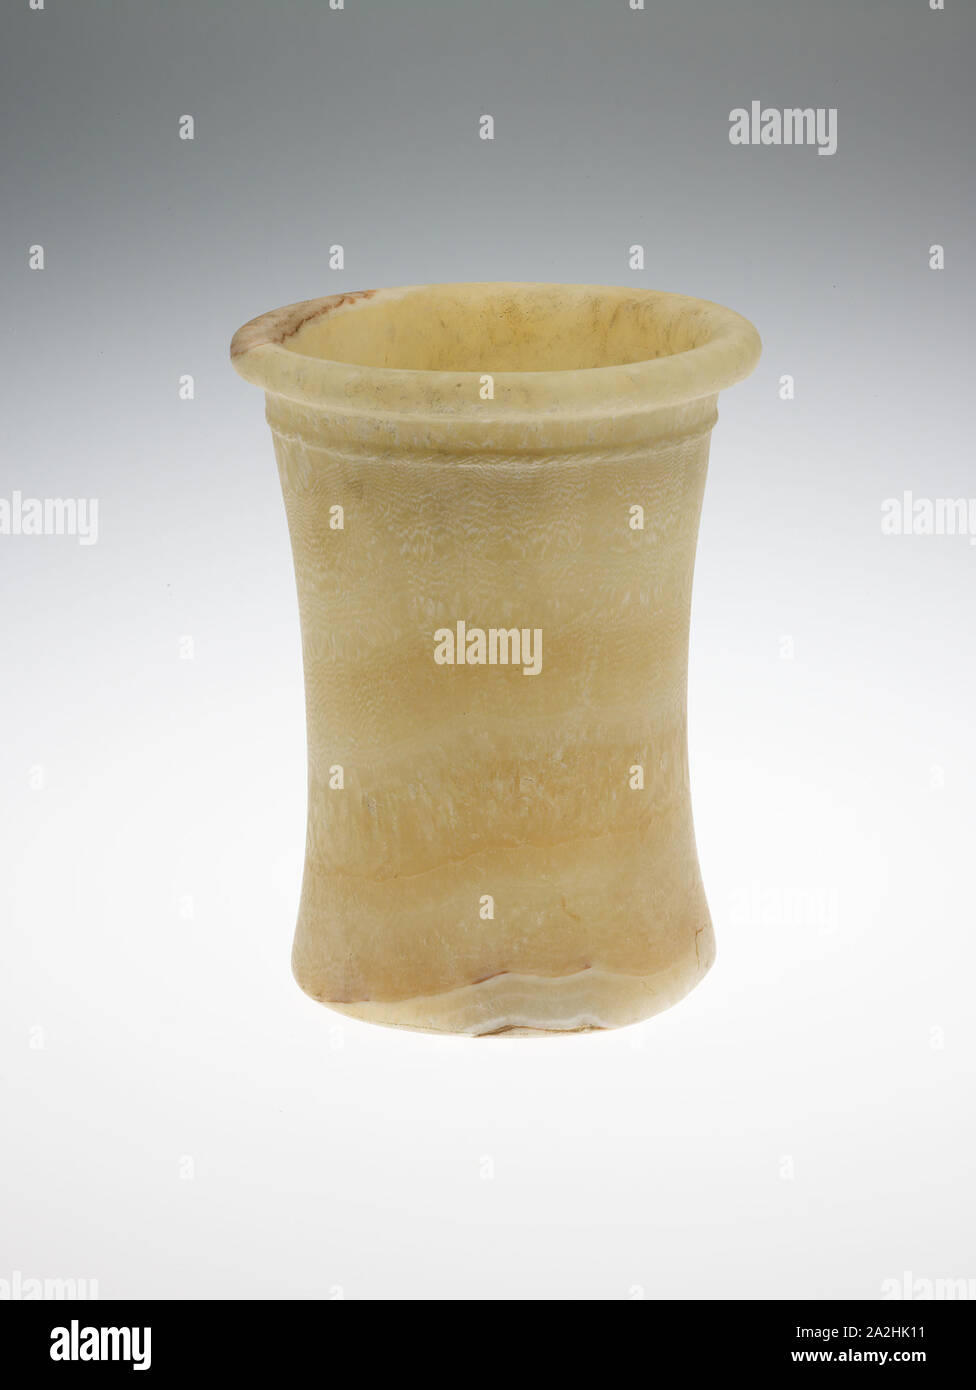 An Egyptian Banded Alabaster Cup, Old Kingdom, probably 1st